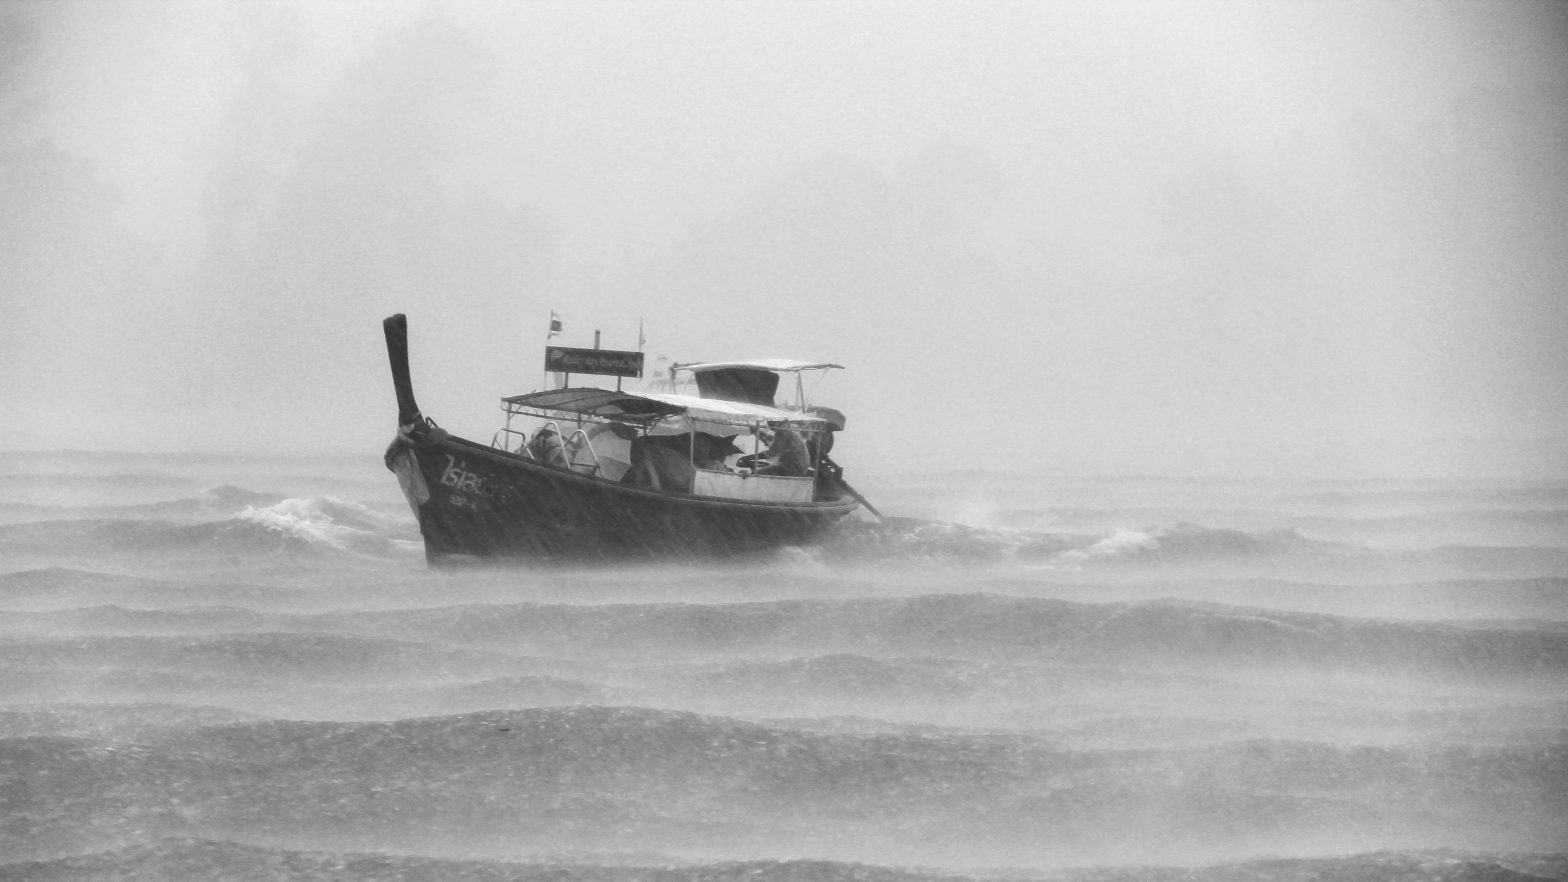 Safe Boating Tips in Foul Weather